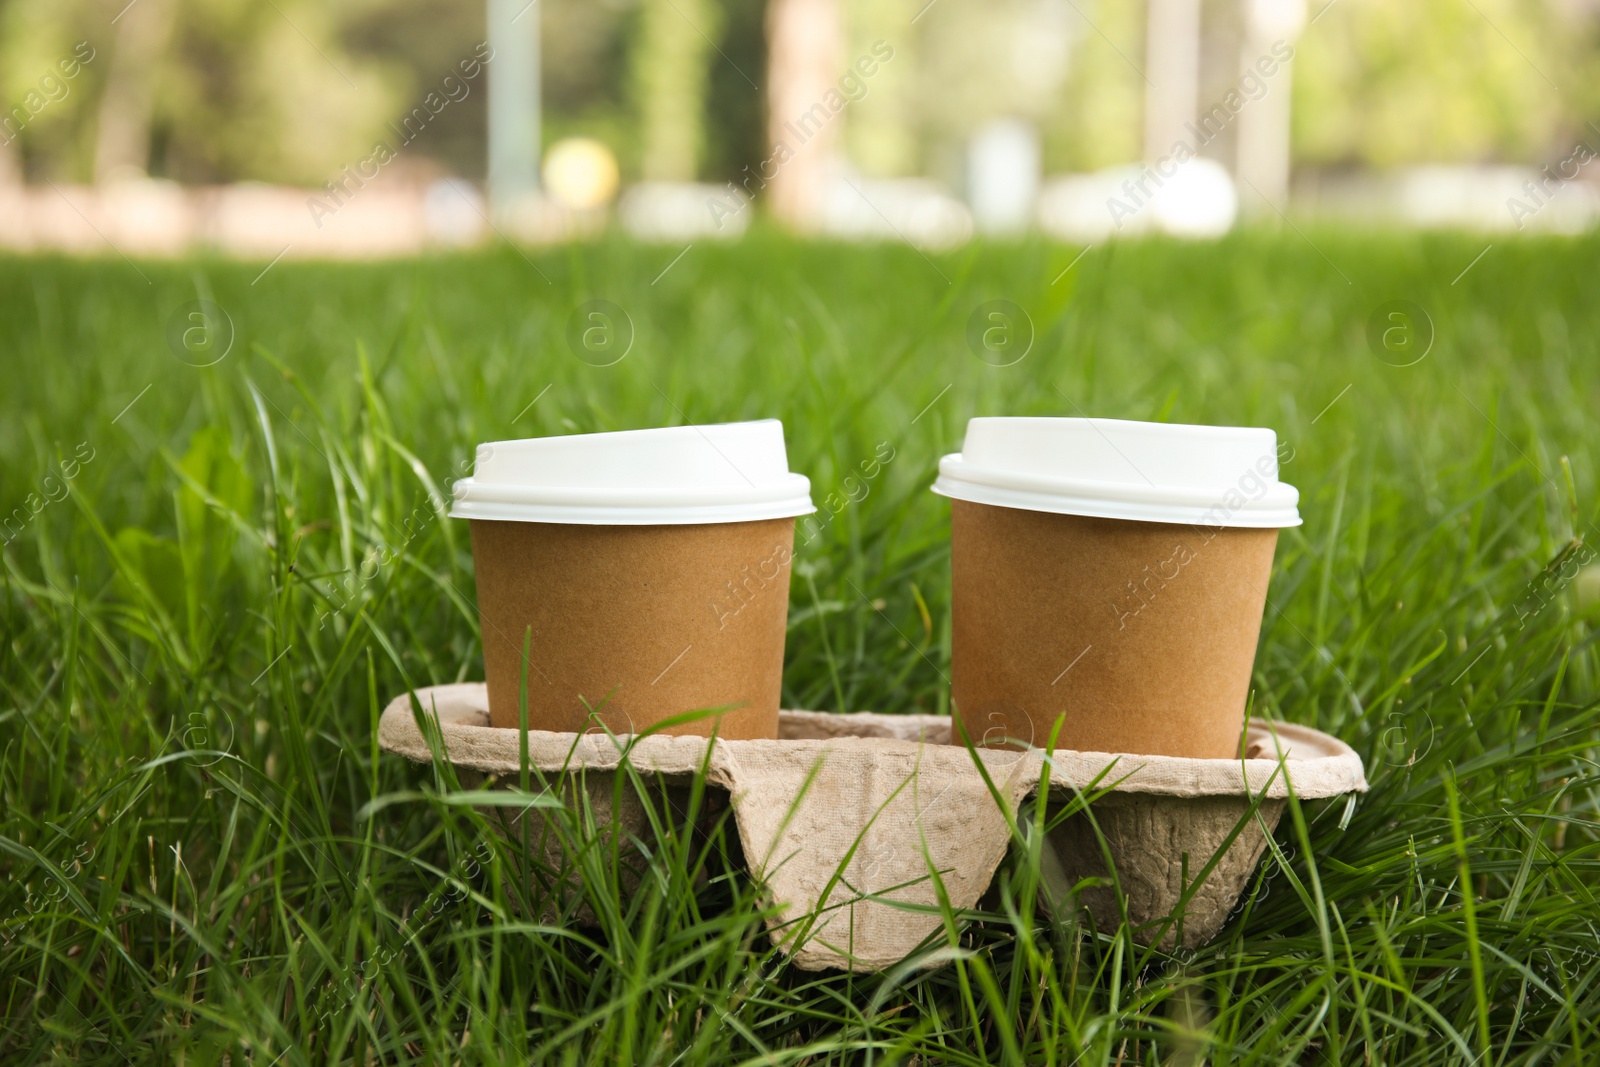 Photo of Takeaway paper coffee cups with plastic lids in cardboard holder on green grass outdoors